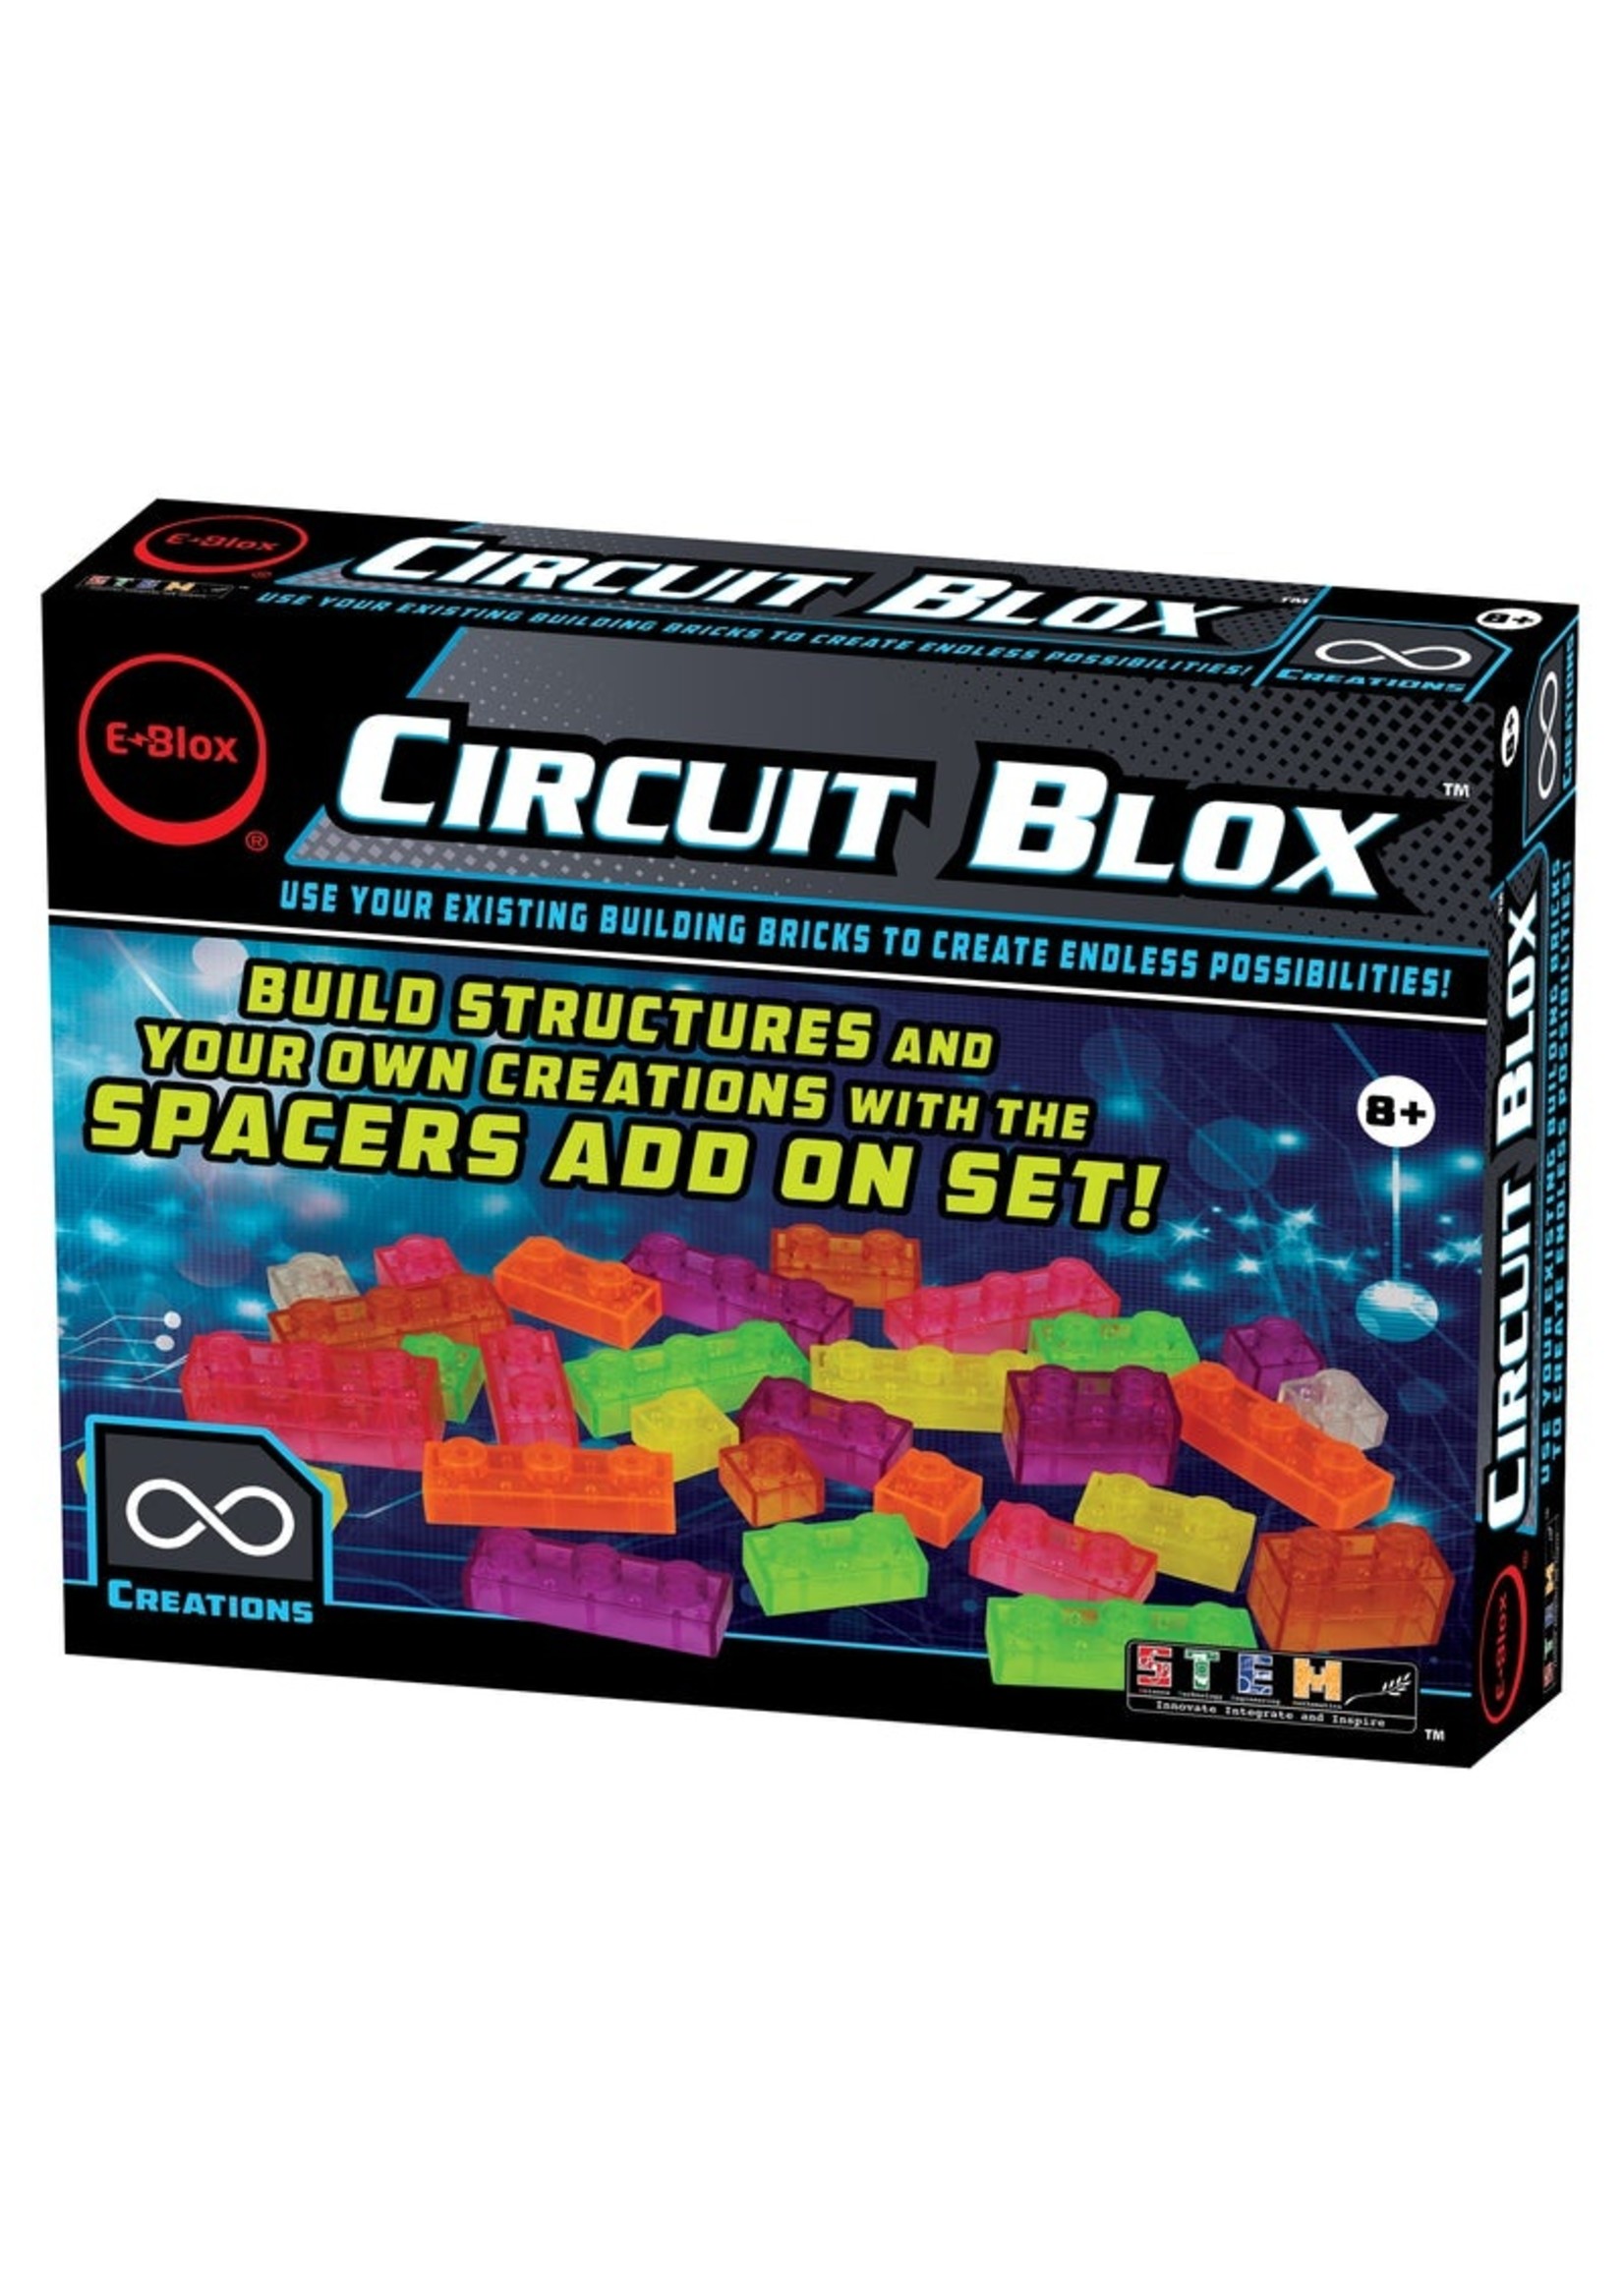 E-Blox Circuit Blox Spacers - 96 pc Add on